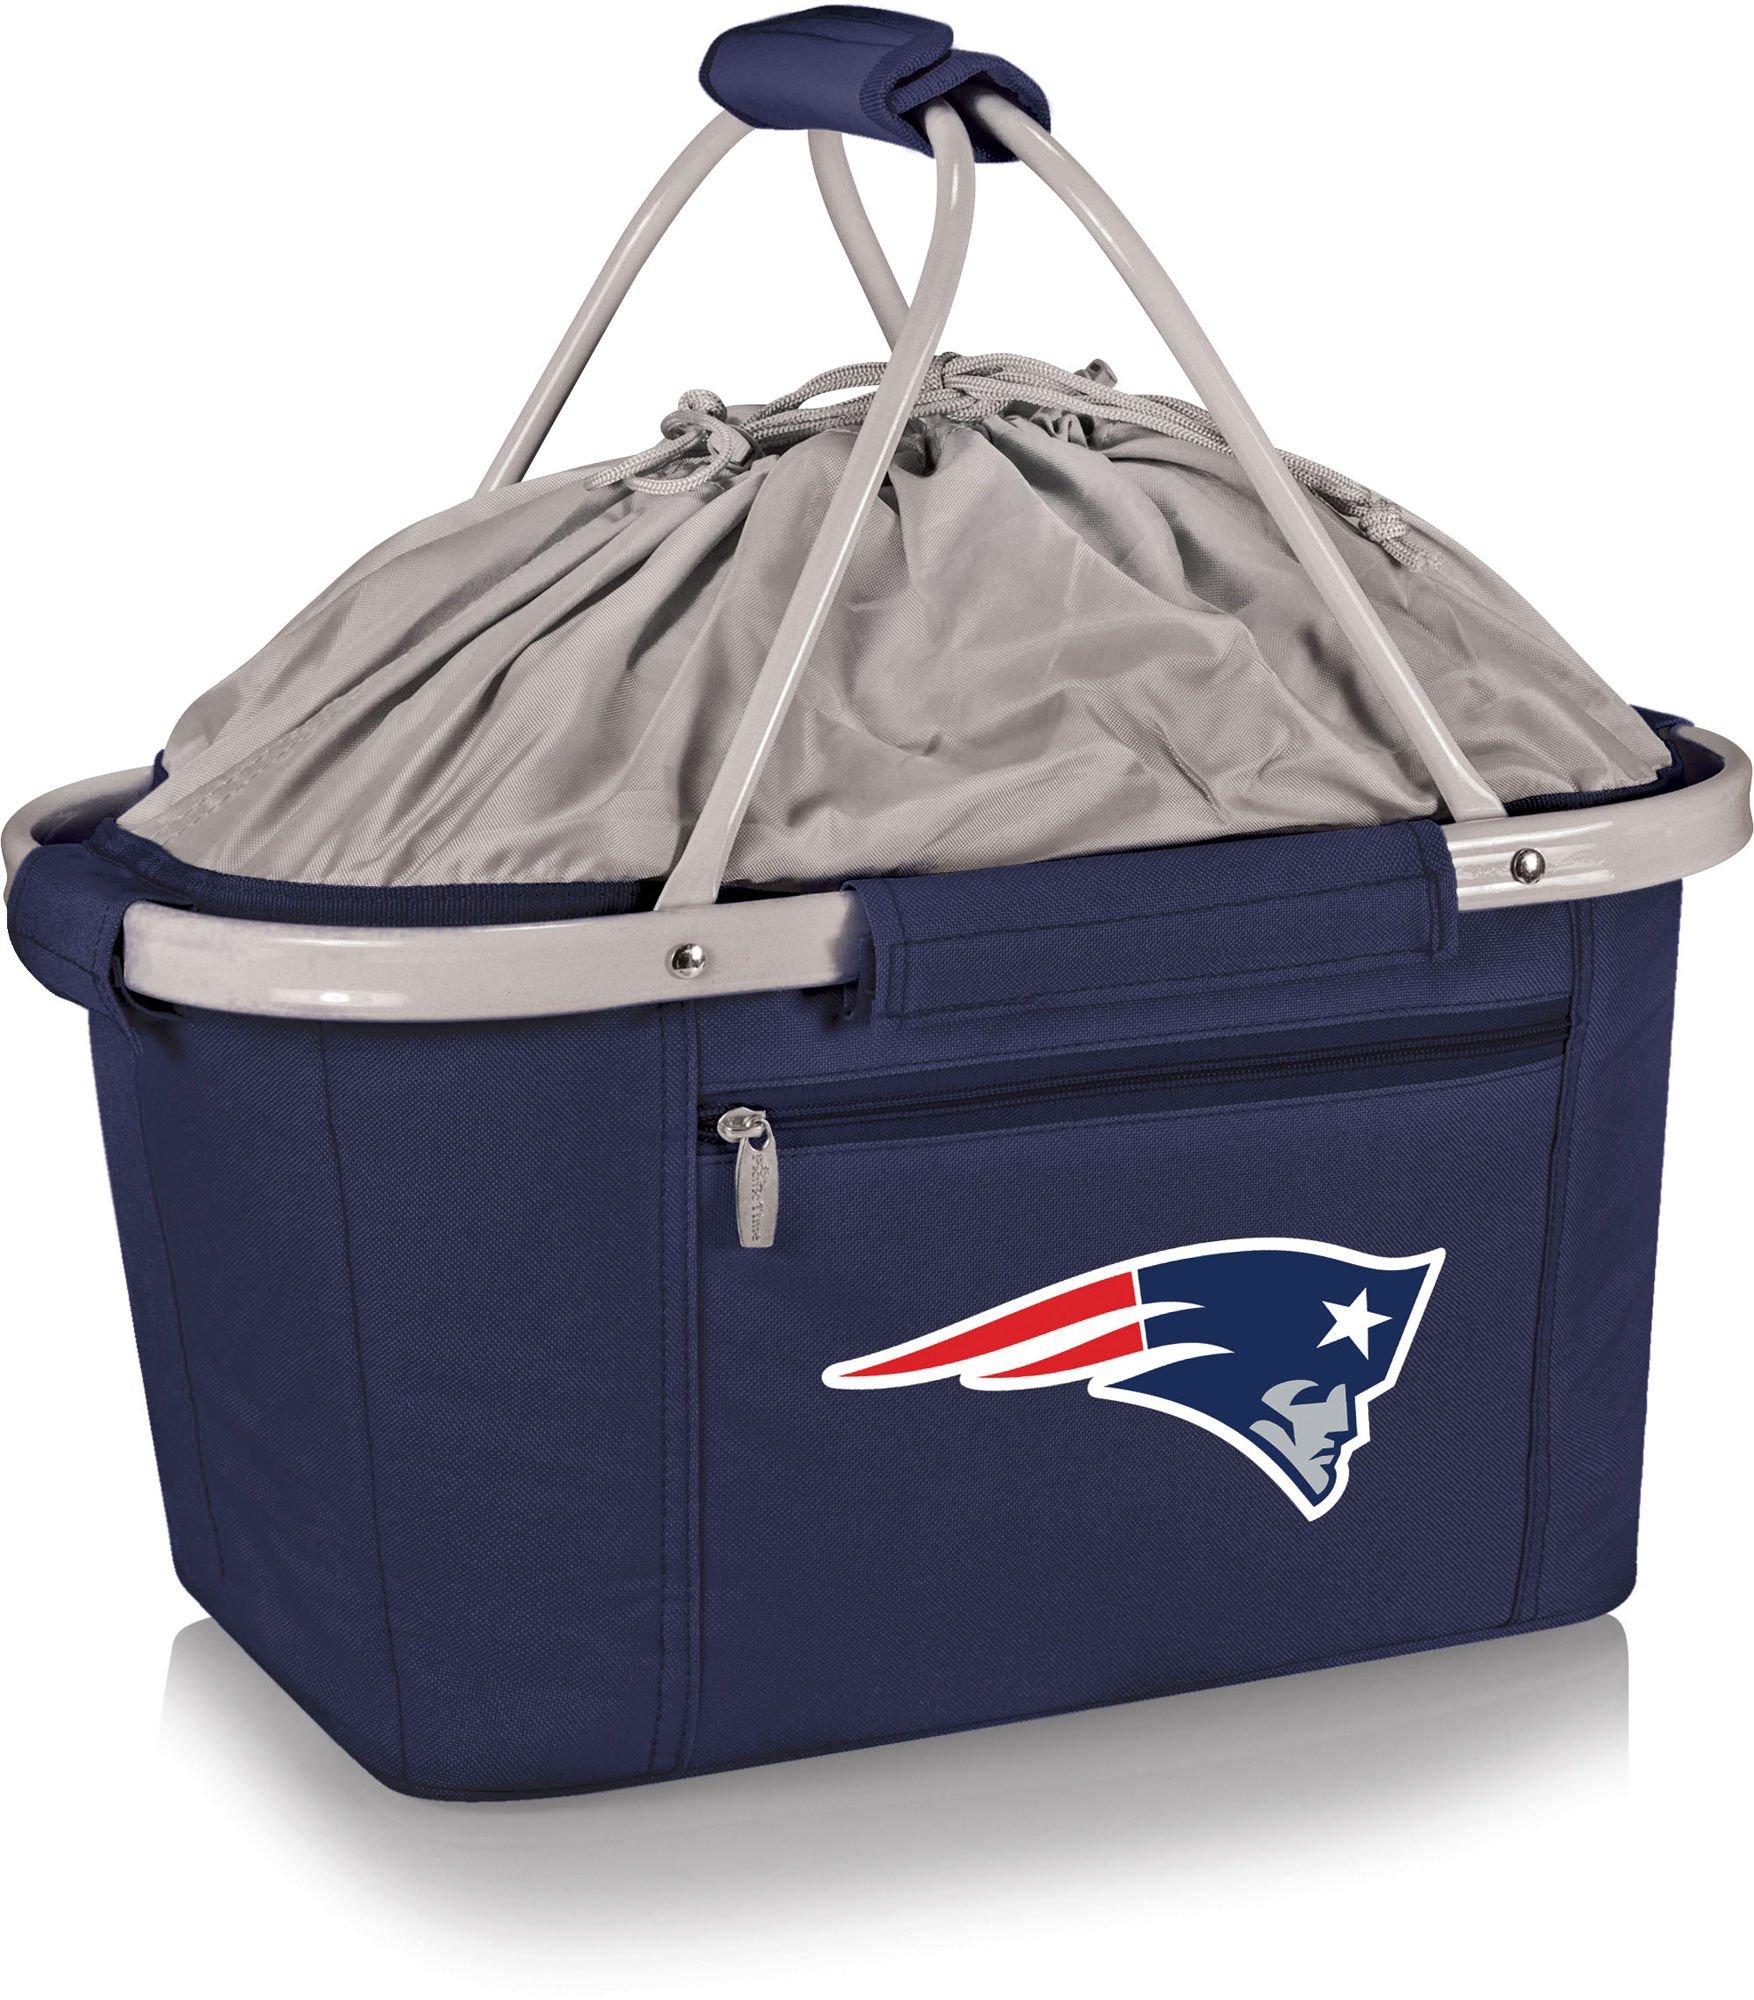 New England Metro Basket Tote by Oniva